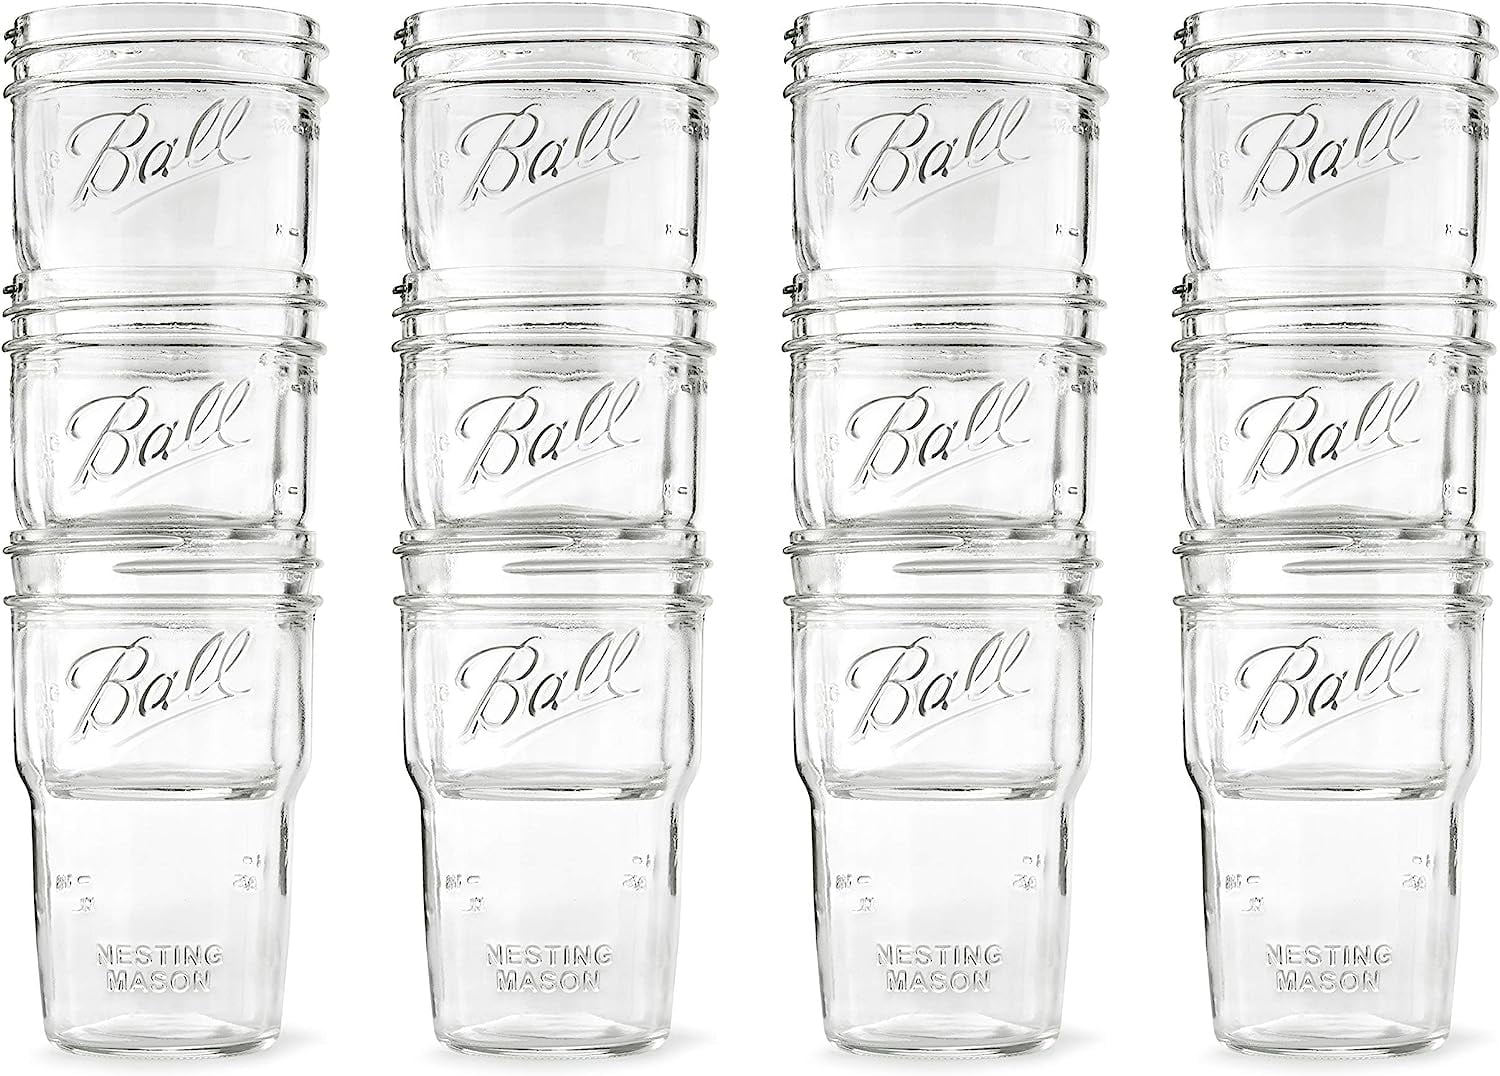 Ball 4-Pack 16 oz Pint Wide Mouth Nesting Jar - Danbury, CT - New Milford,  CT - Agriventures Agway Pickup & Delivery